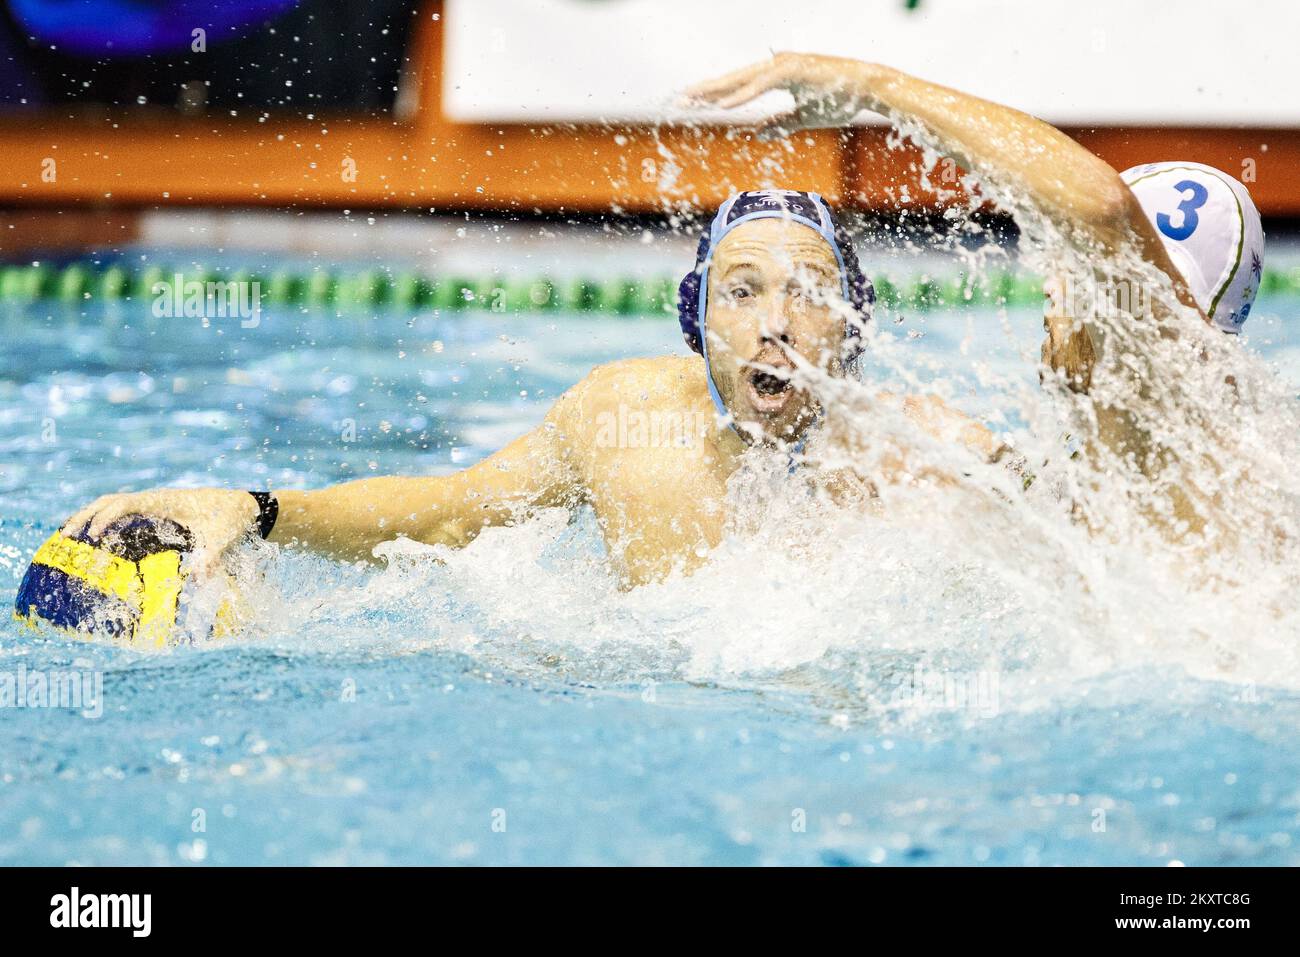 Adrian Delgado Baches of Barcelona takes a goal during the Champions League Qualification Round 2, Goup F waterpolo match Jadran Split and CN Barcelona on Octorber 9, 2021 at Poljud pools in Split, Croatia. Photo: Milan Sabic/PIXSELL Stock Photo